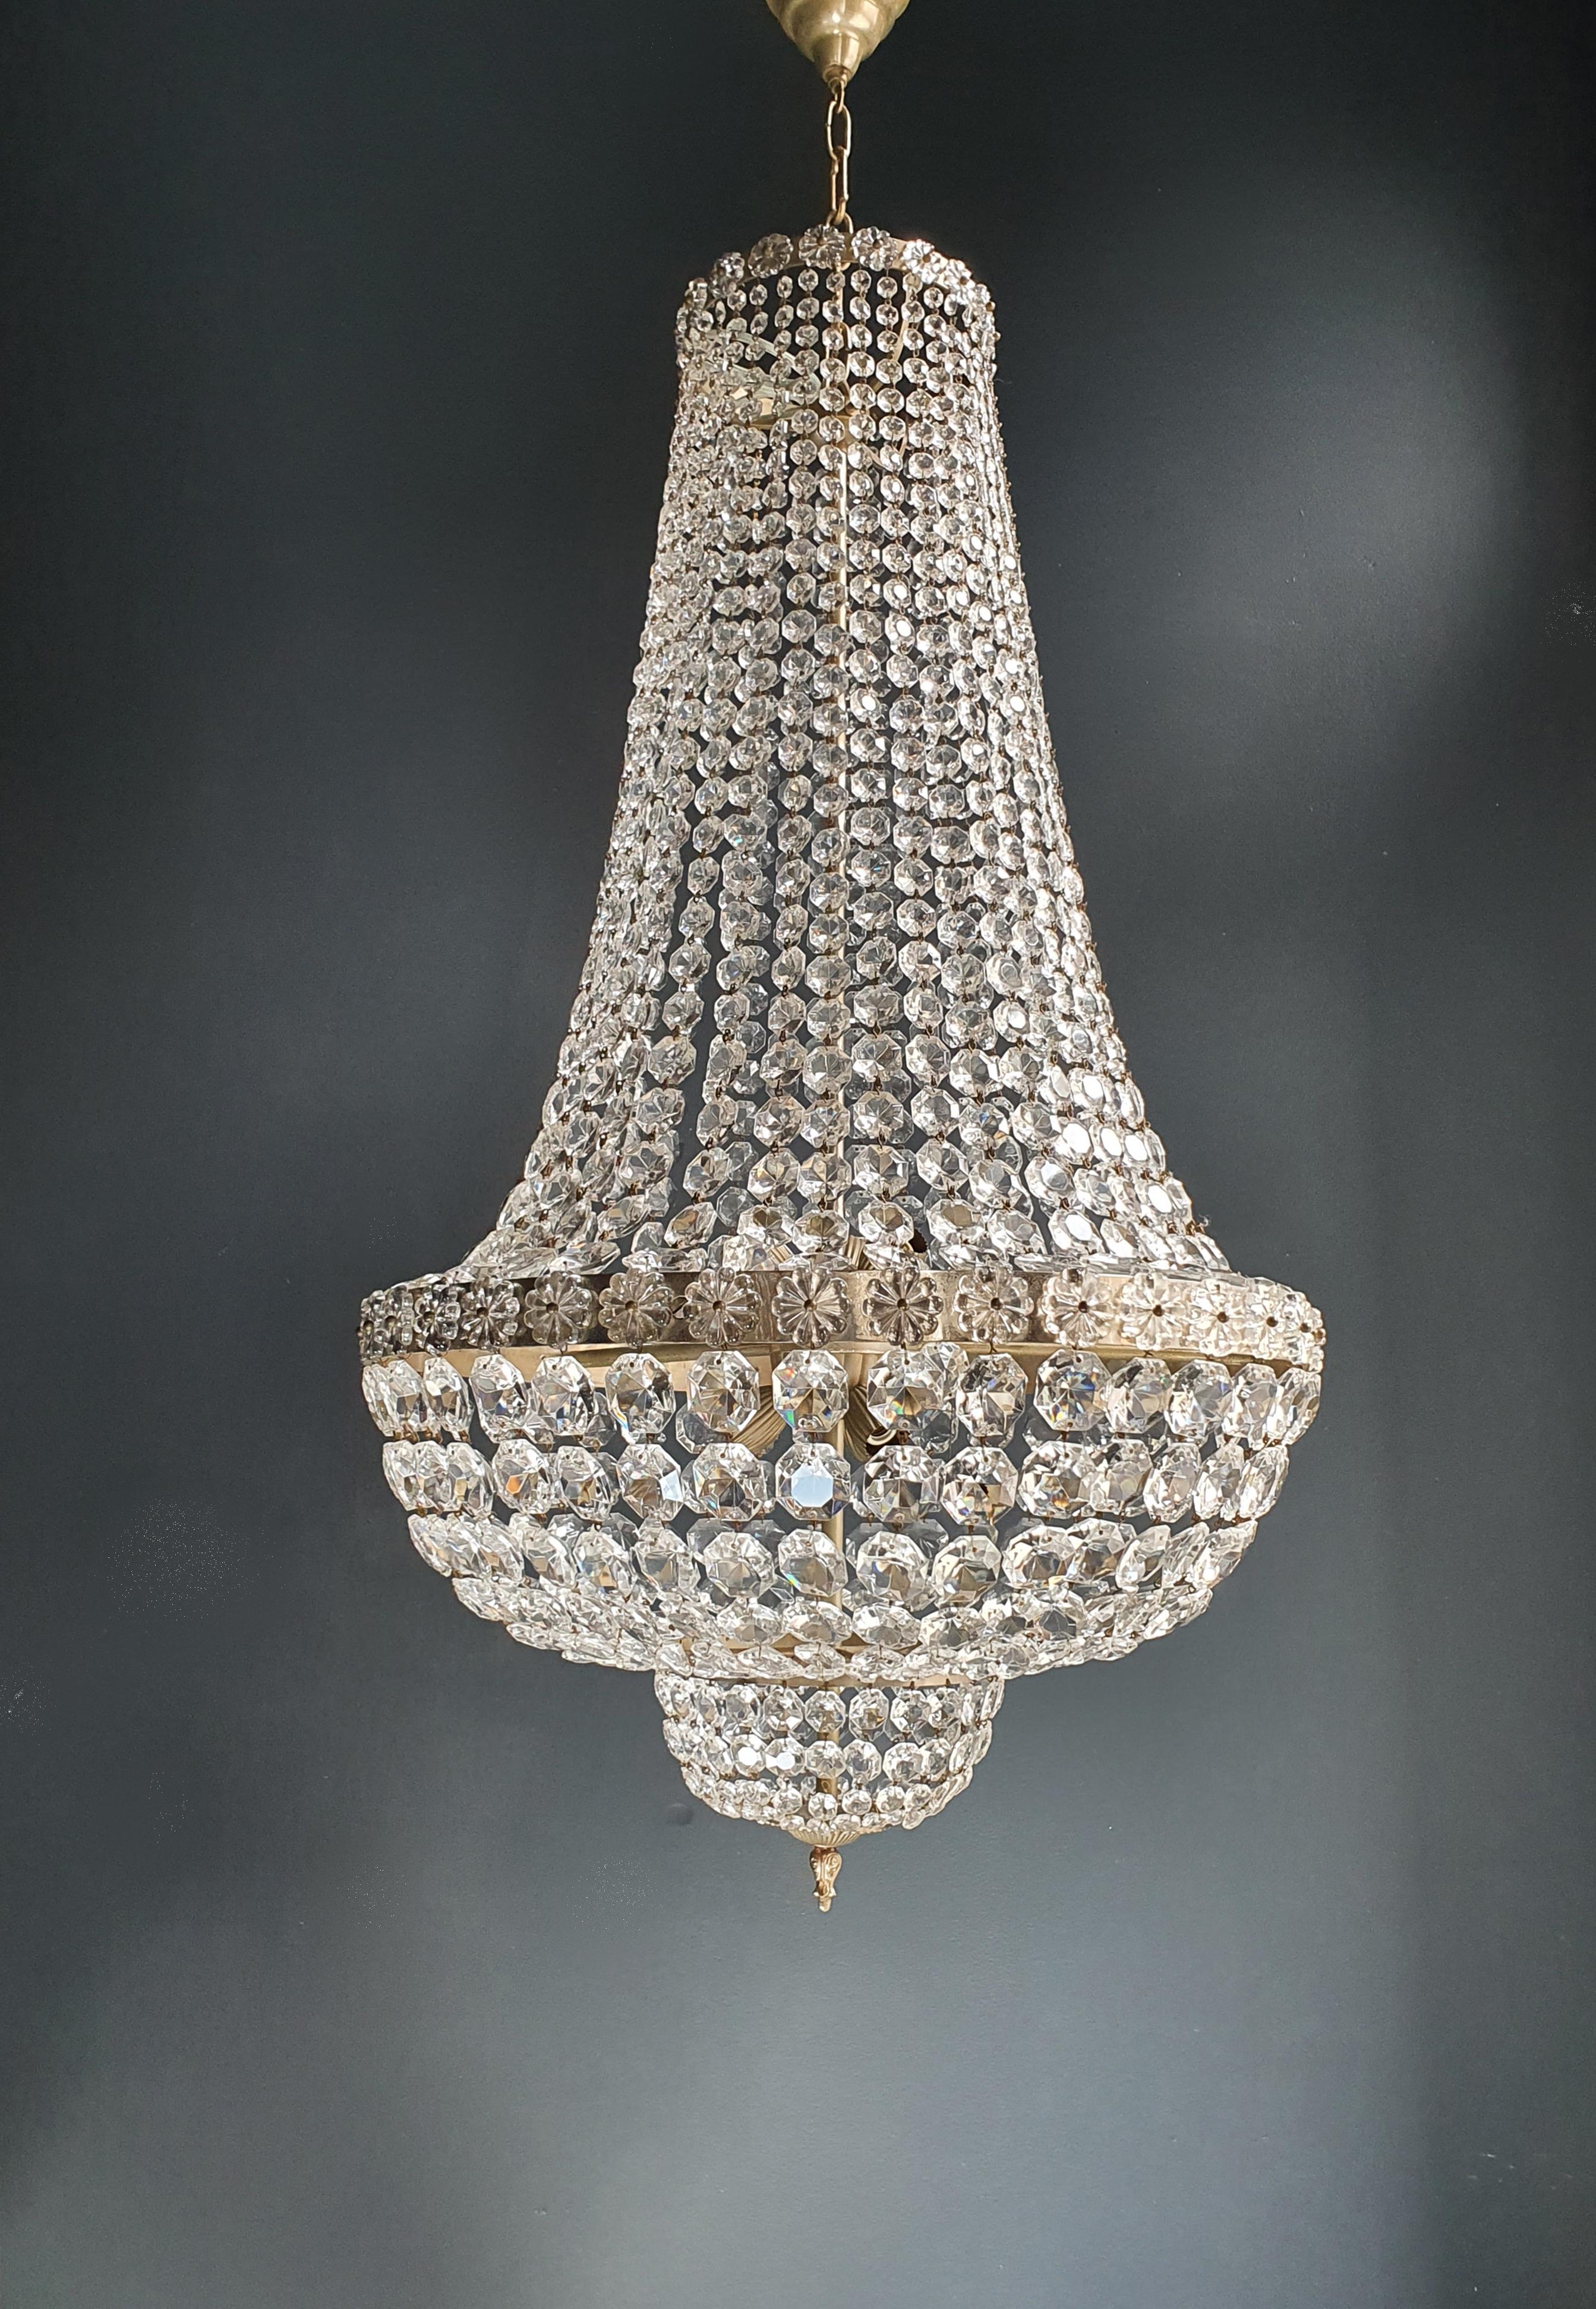 Hand-Knotted Fine Brass Empire Chandelier Crystal Sac a Pearl Silver Chrome Art Deco Classic